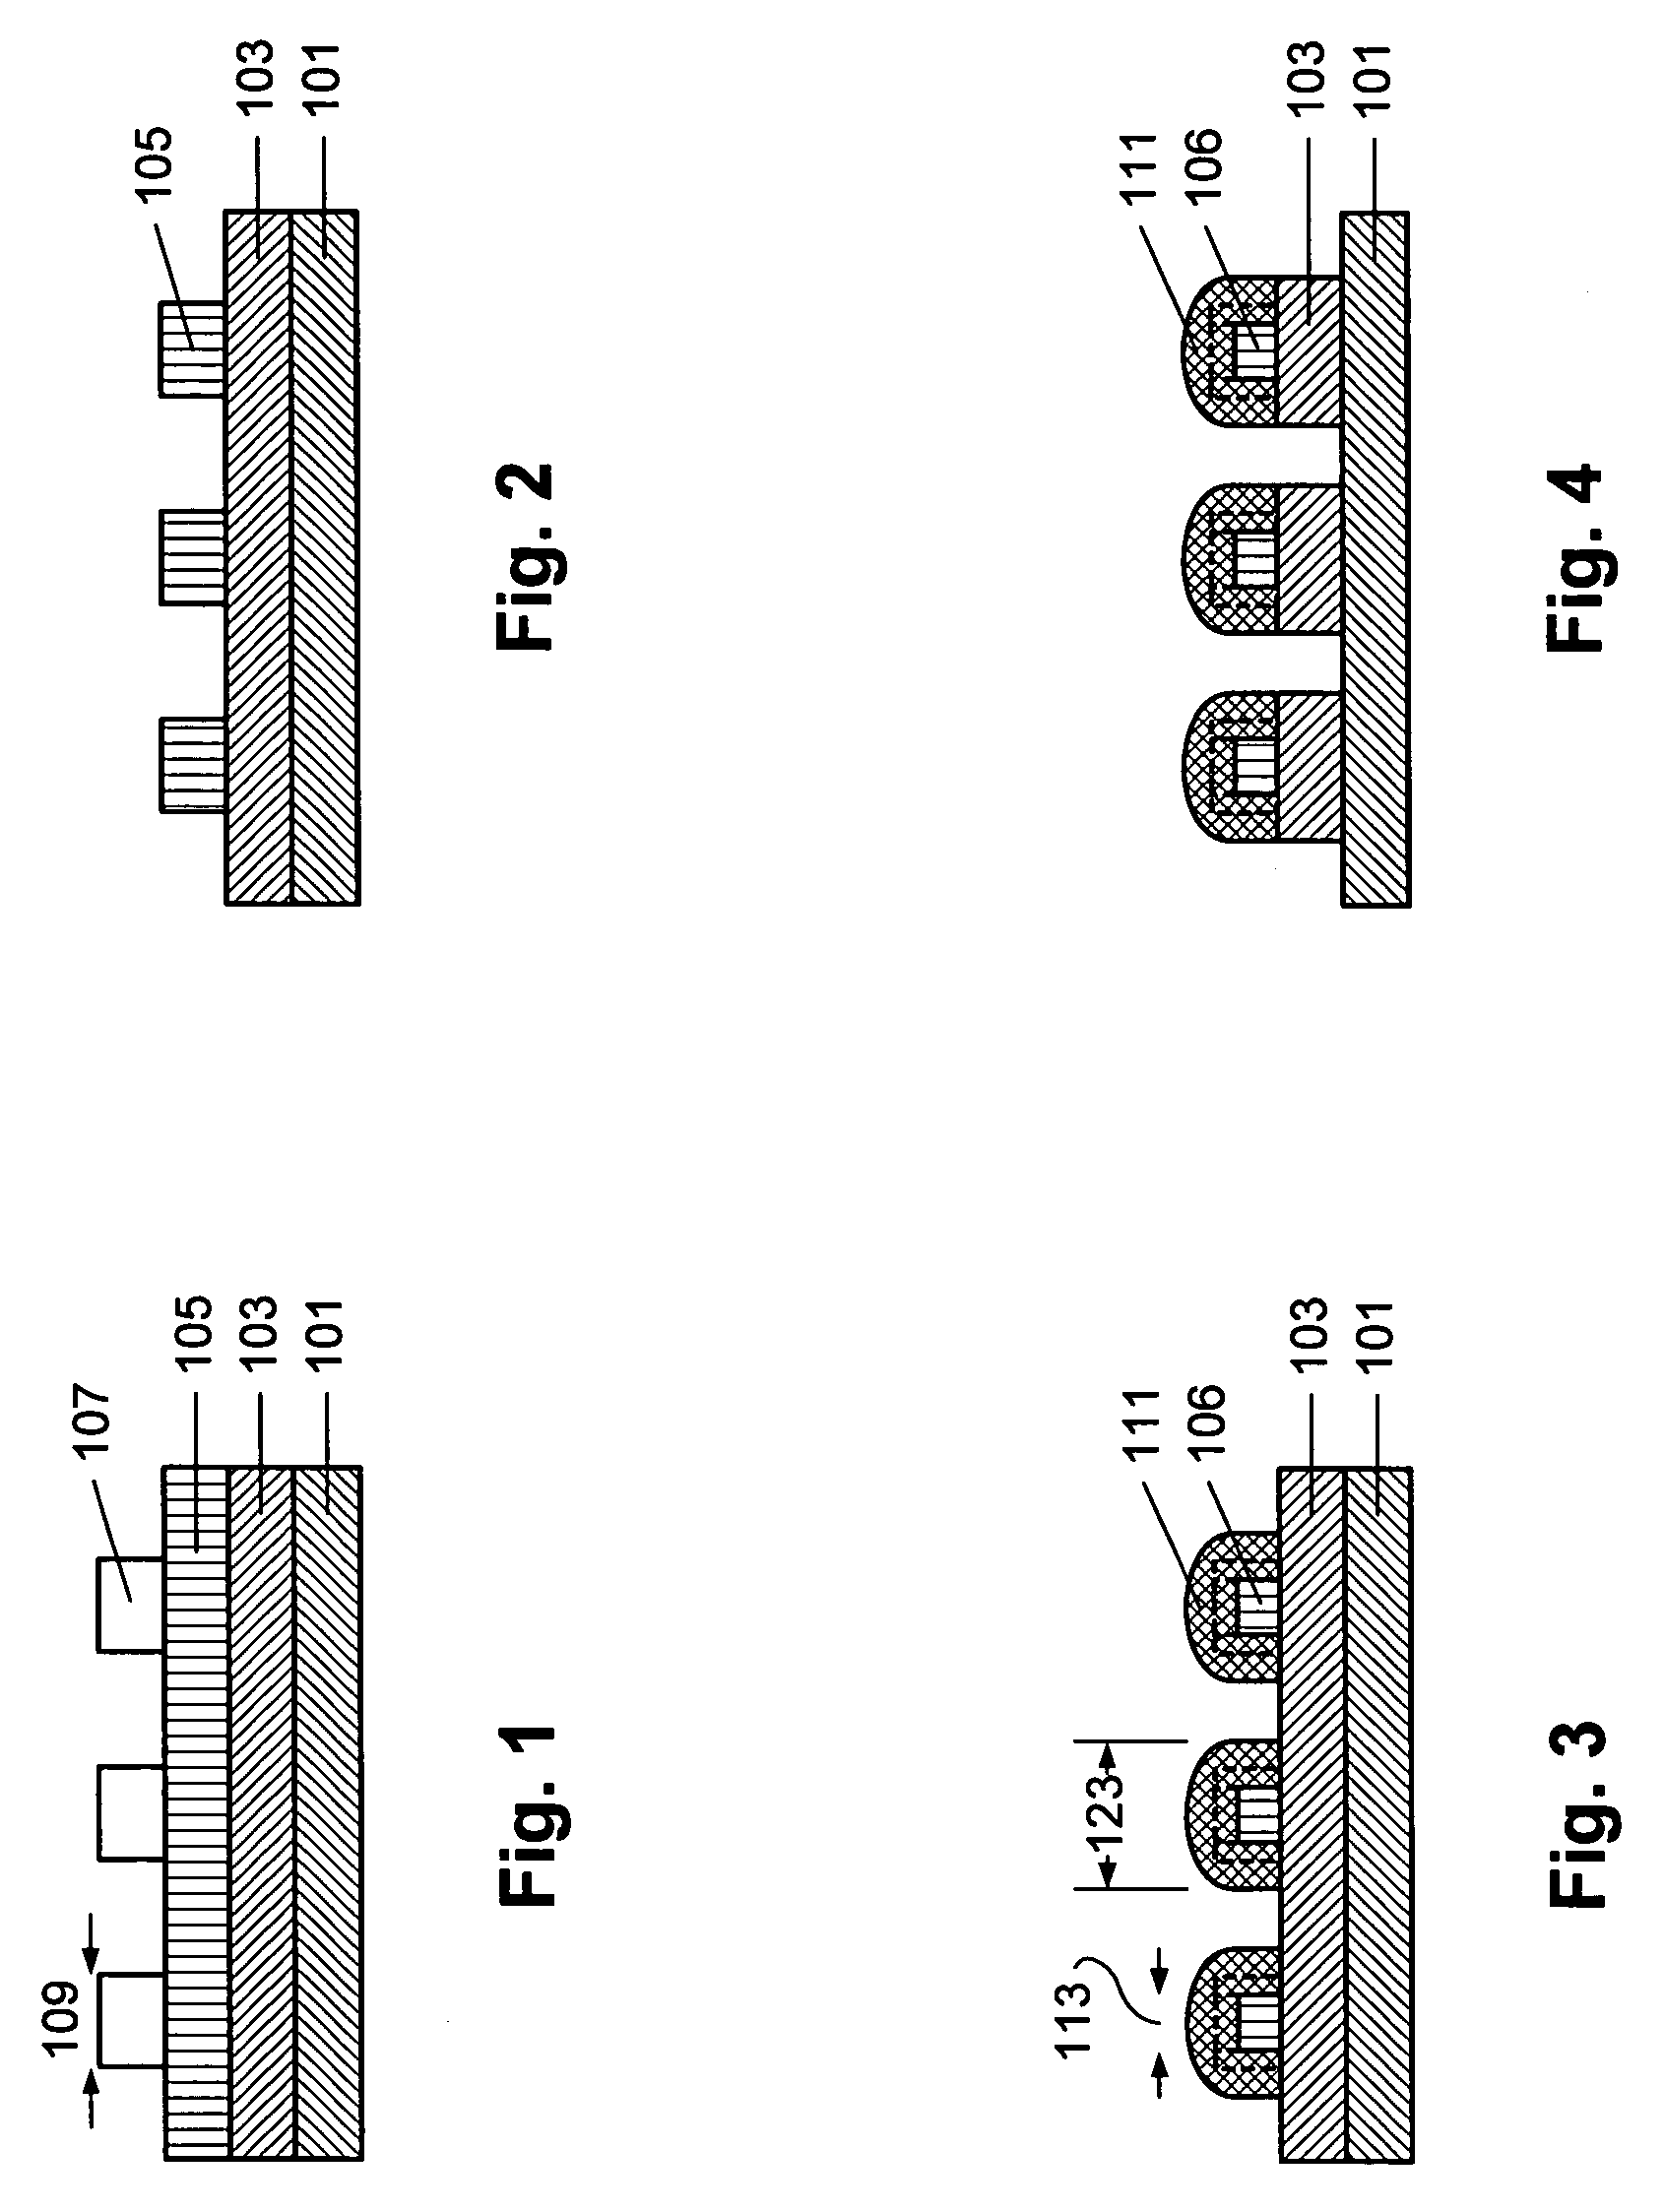 Method of pitch dimension shrinkage